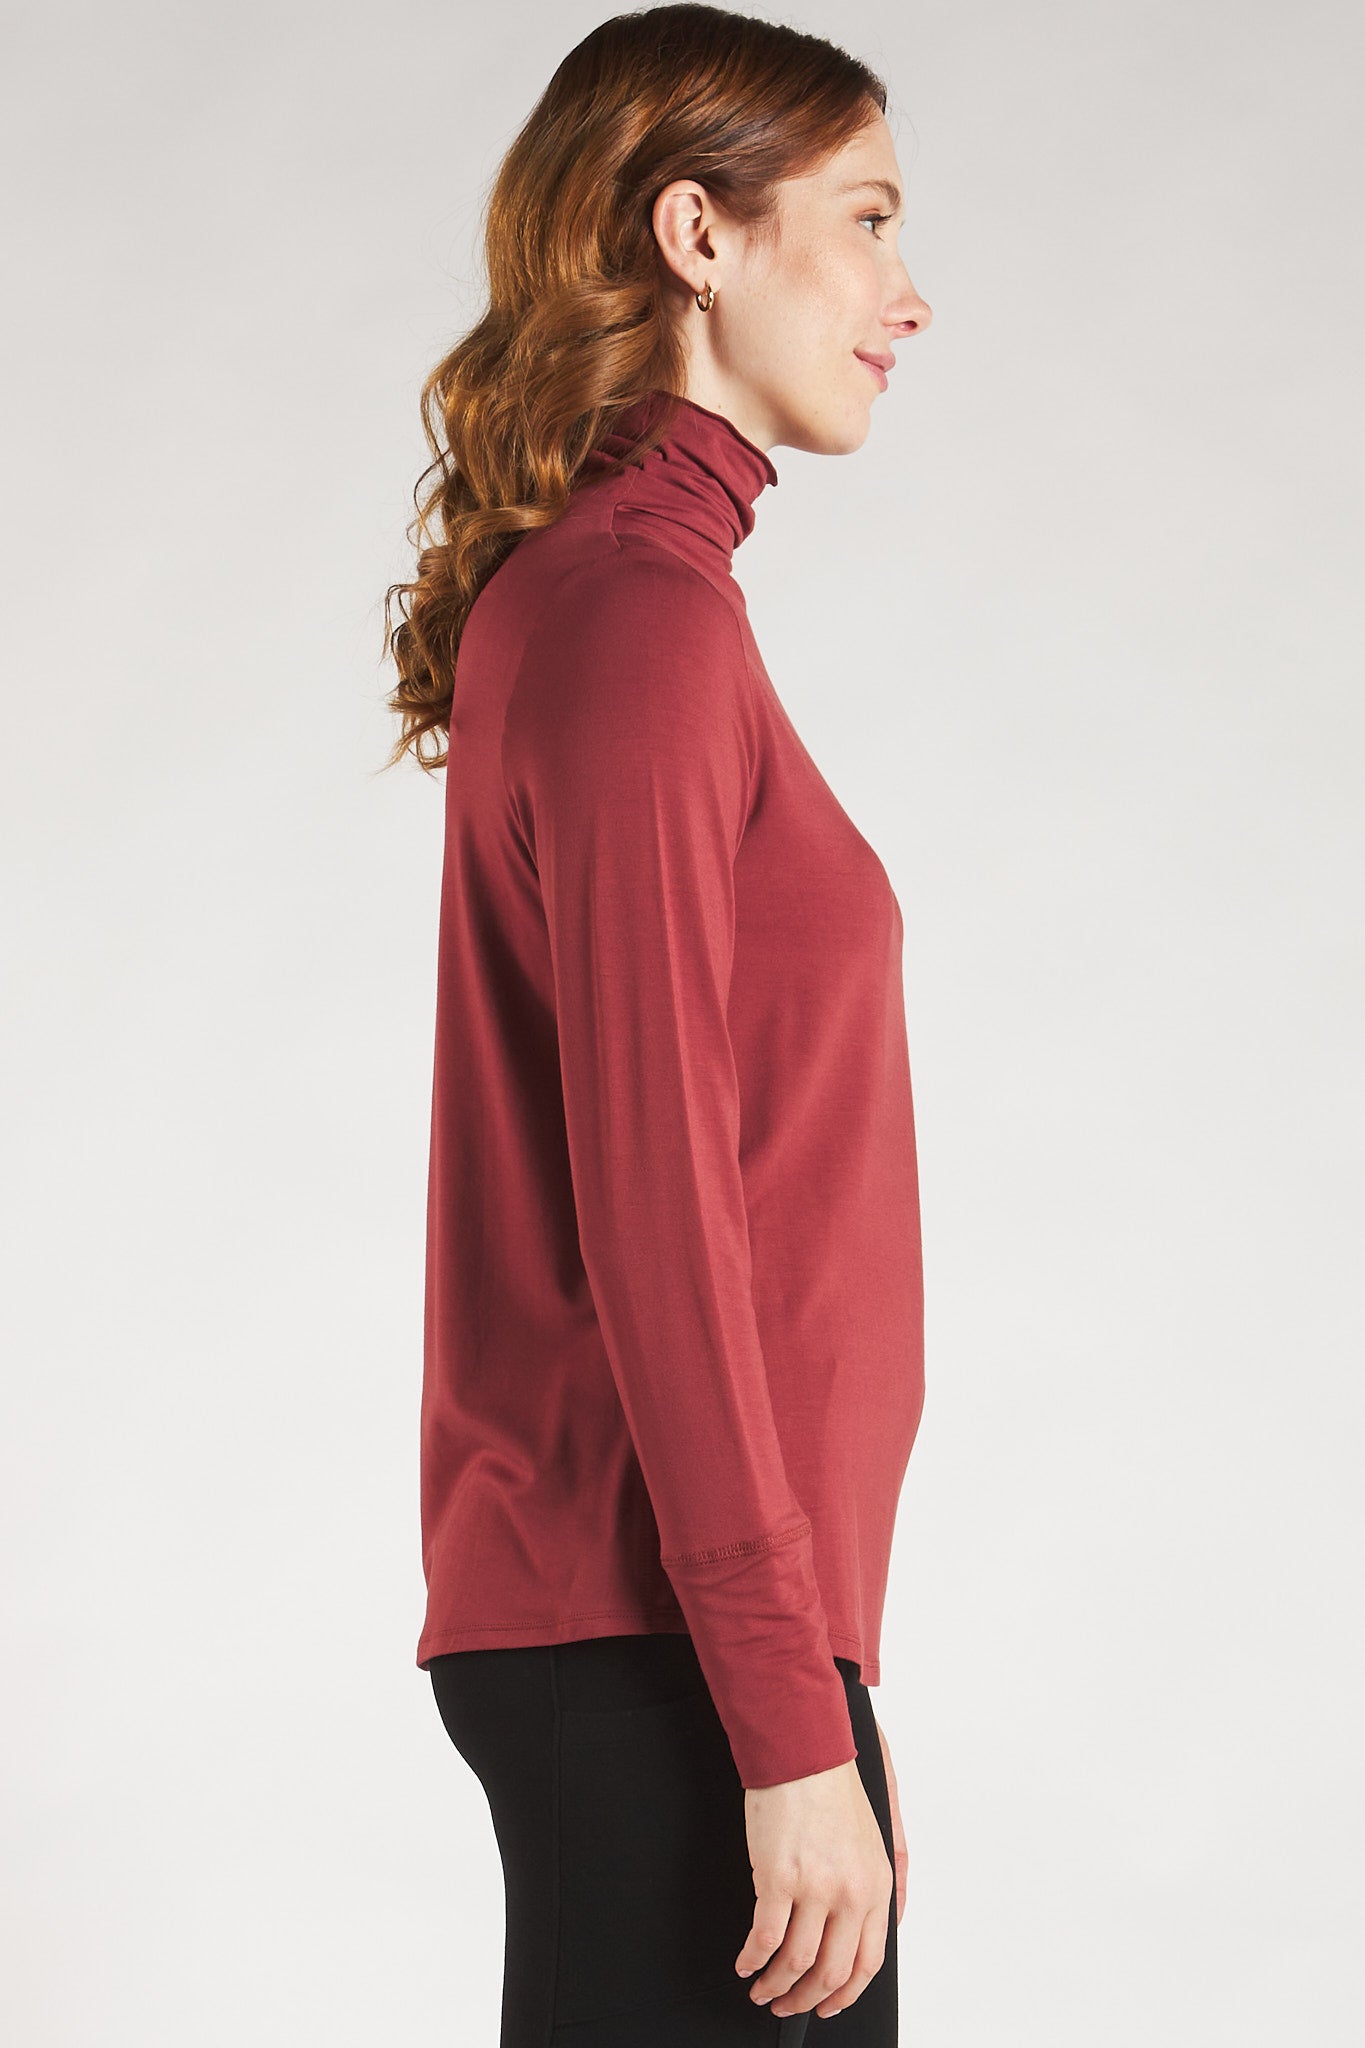 Side view of woman styling a Rosewood long sleeve turtleneck top by Terrera.